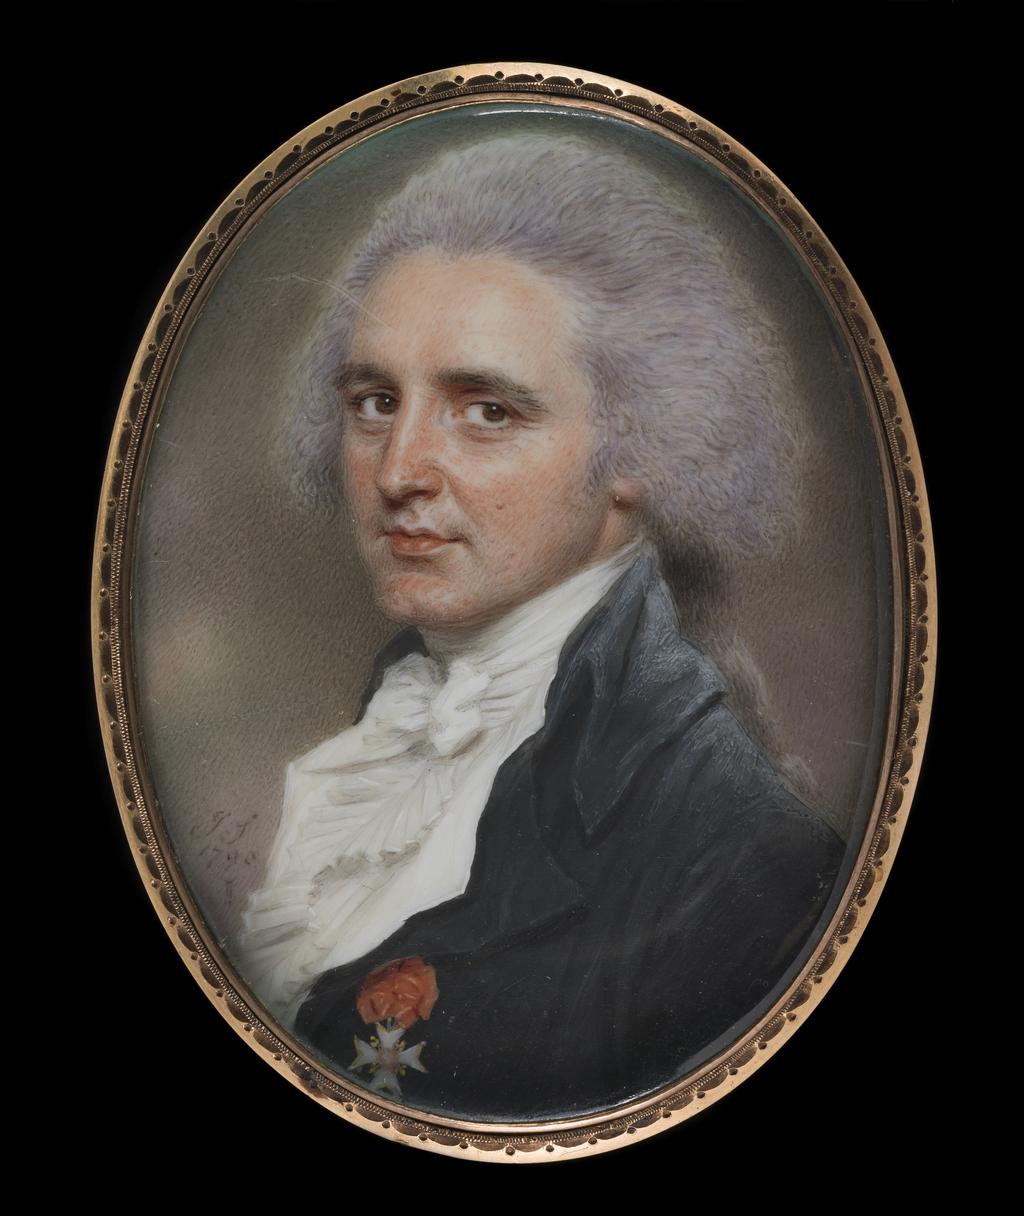 An image of An unknown man, presumably an émigré, wearing the Cross of St Louis. Smart, John (British, 1741-1811). Watercolour on ivory, height 58 mm, width 44 mm, 1790. Production Place: India.